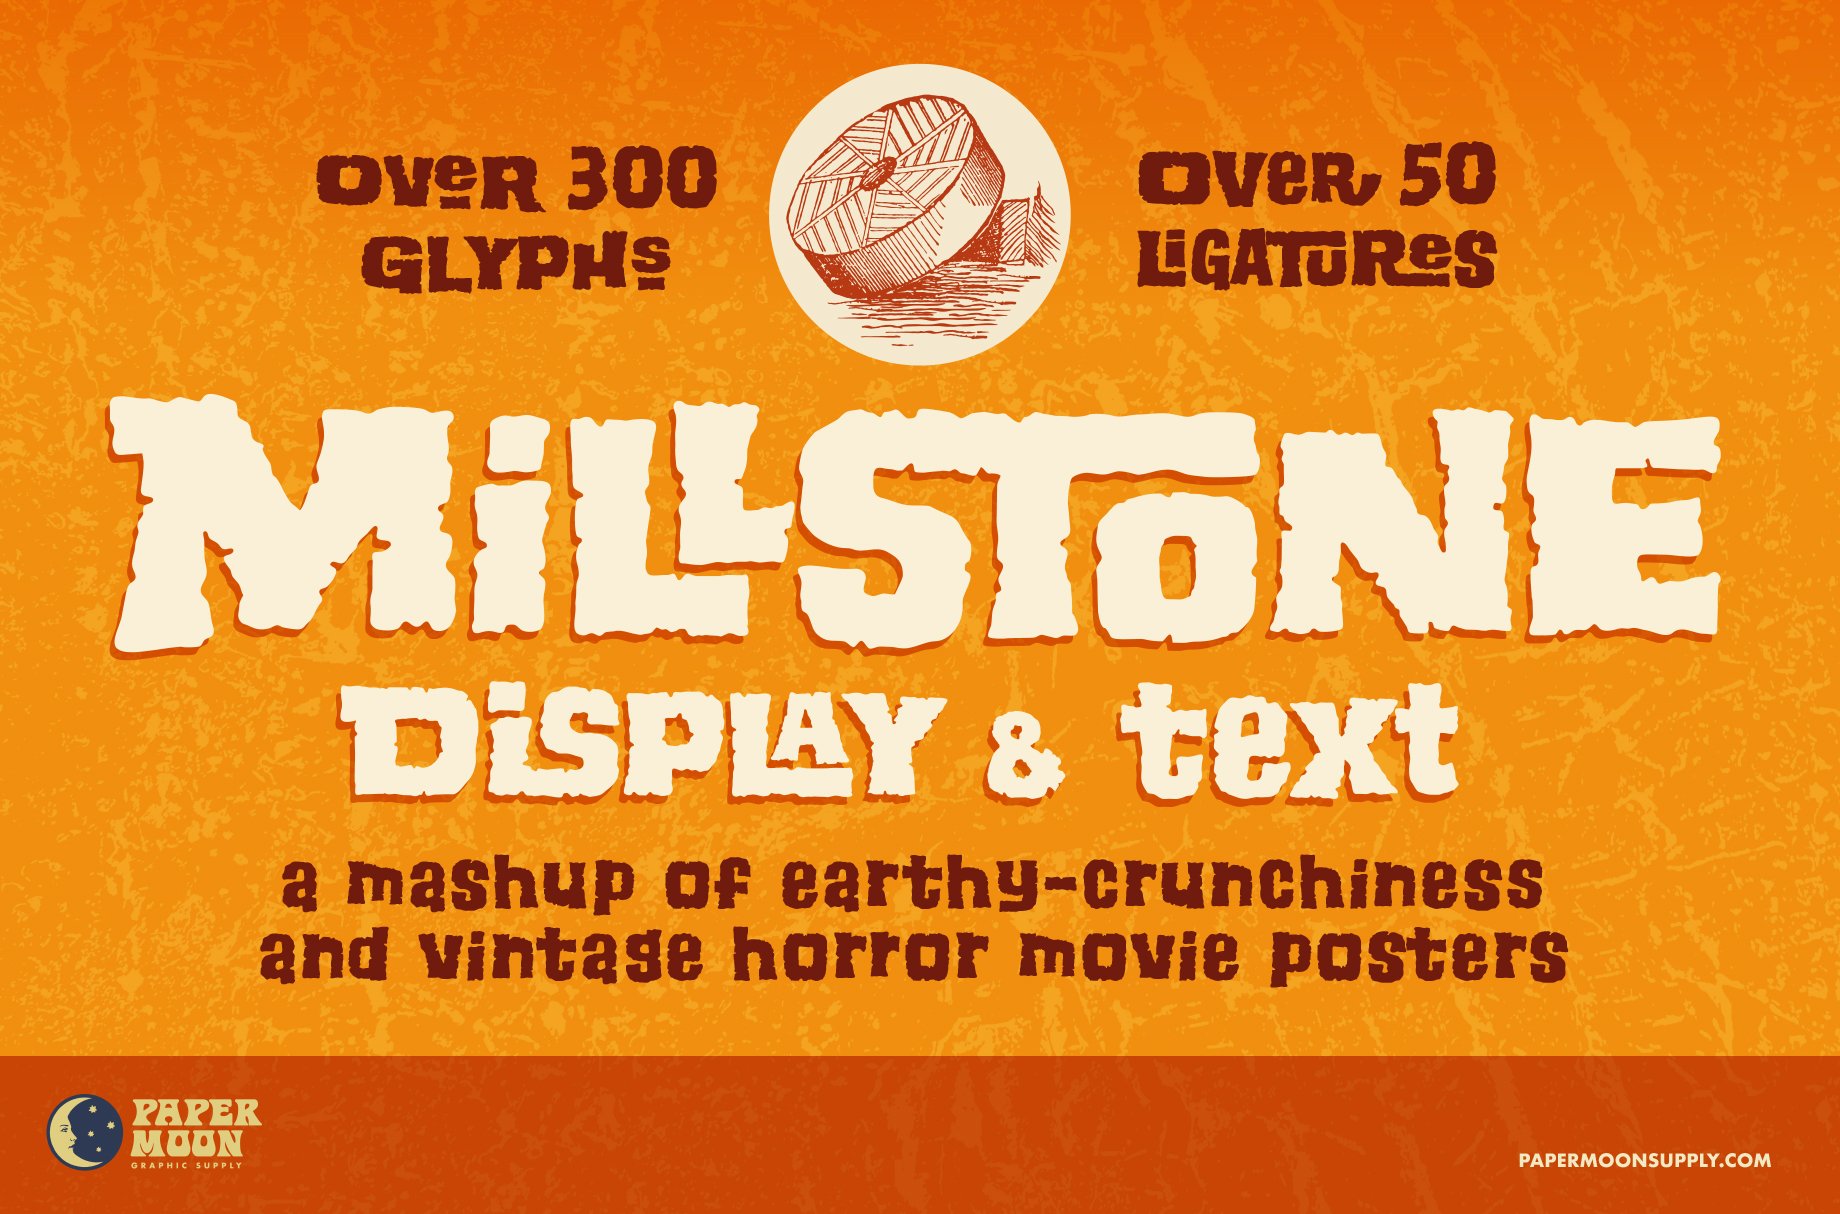 Millstone Hand-Lettered Font Family cover image.